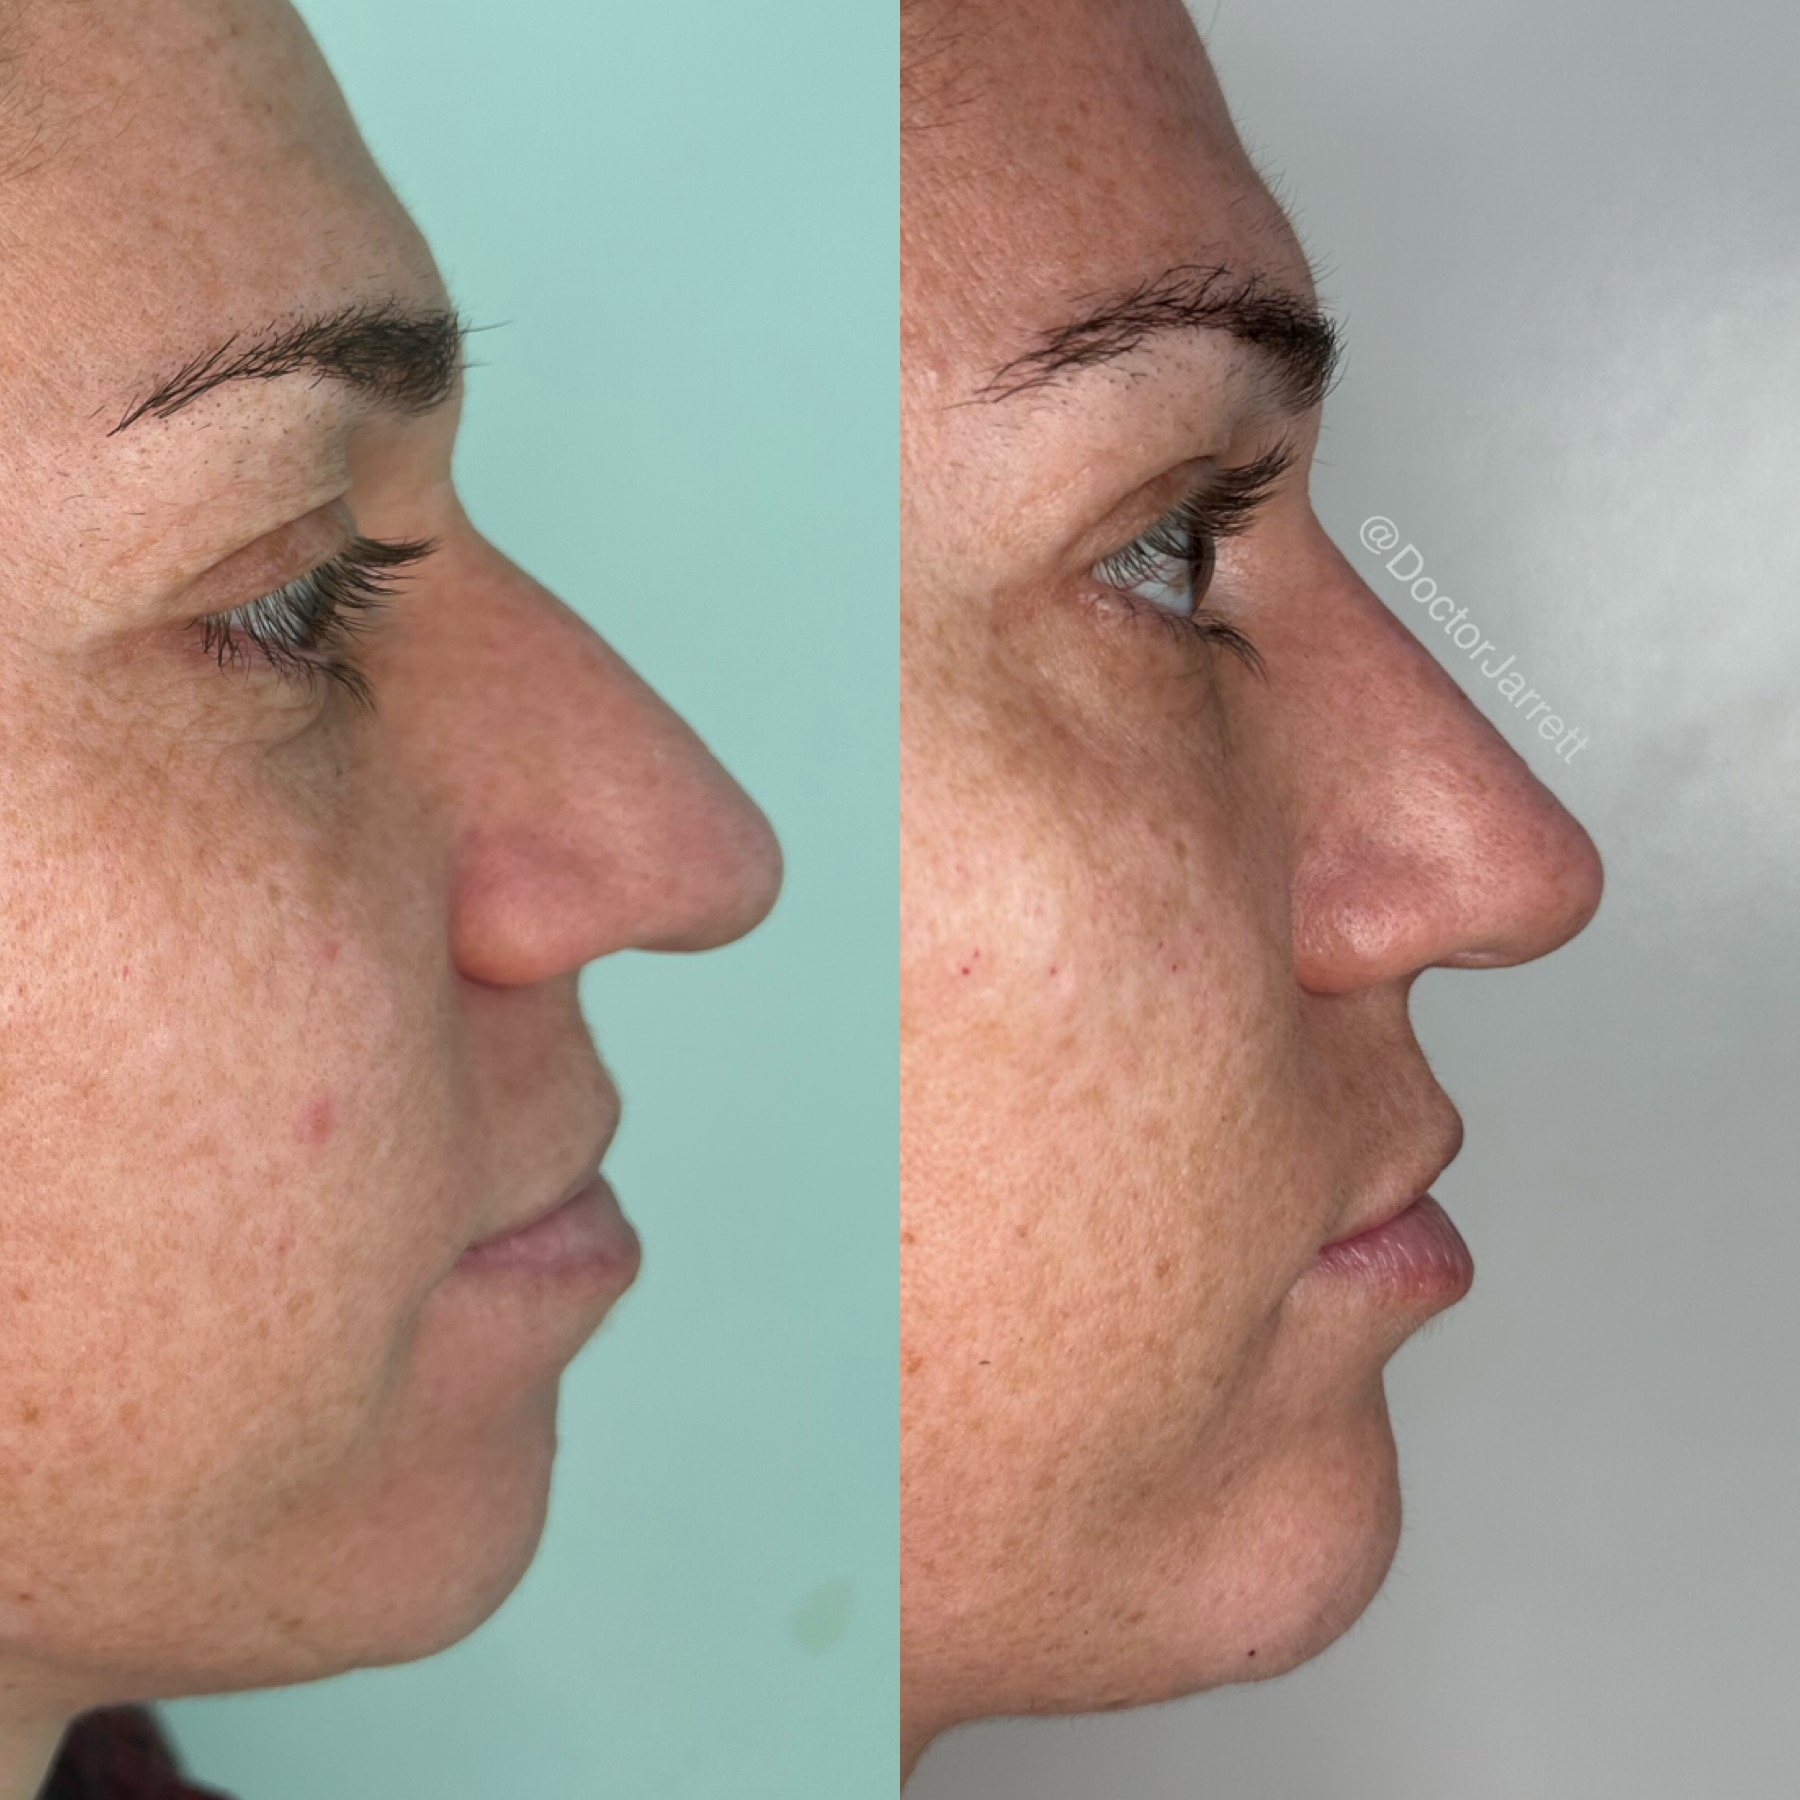 nose 
miami
non surgical
nose job
rhinoplasty
no downtime
filler
injections
miami
new york
doctor
jarrett
schanzer
americas
best
beauty